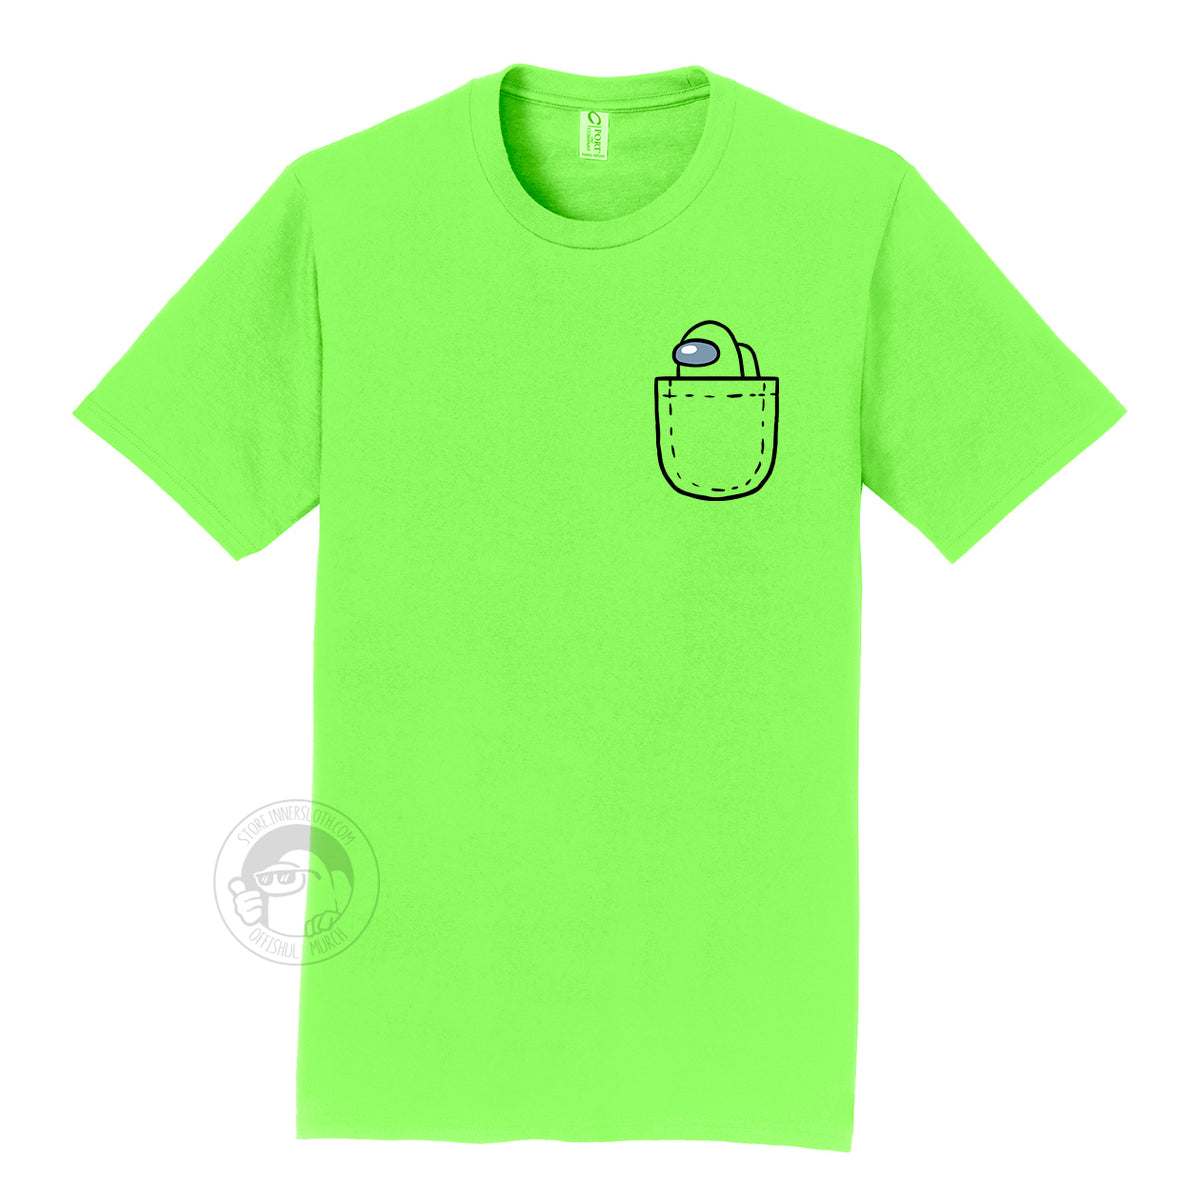 A product photograph of the Among Us: Mini Crewmate Pocket Tee in lime green. The shirt art depicts a fake pocket and a small crewmate peeking out of it. The crewmate is the same color as the rest of the shirt.